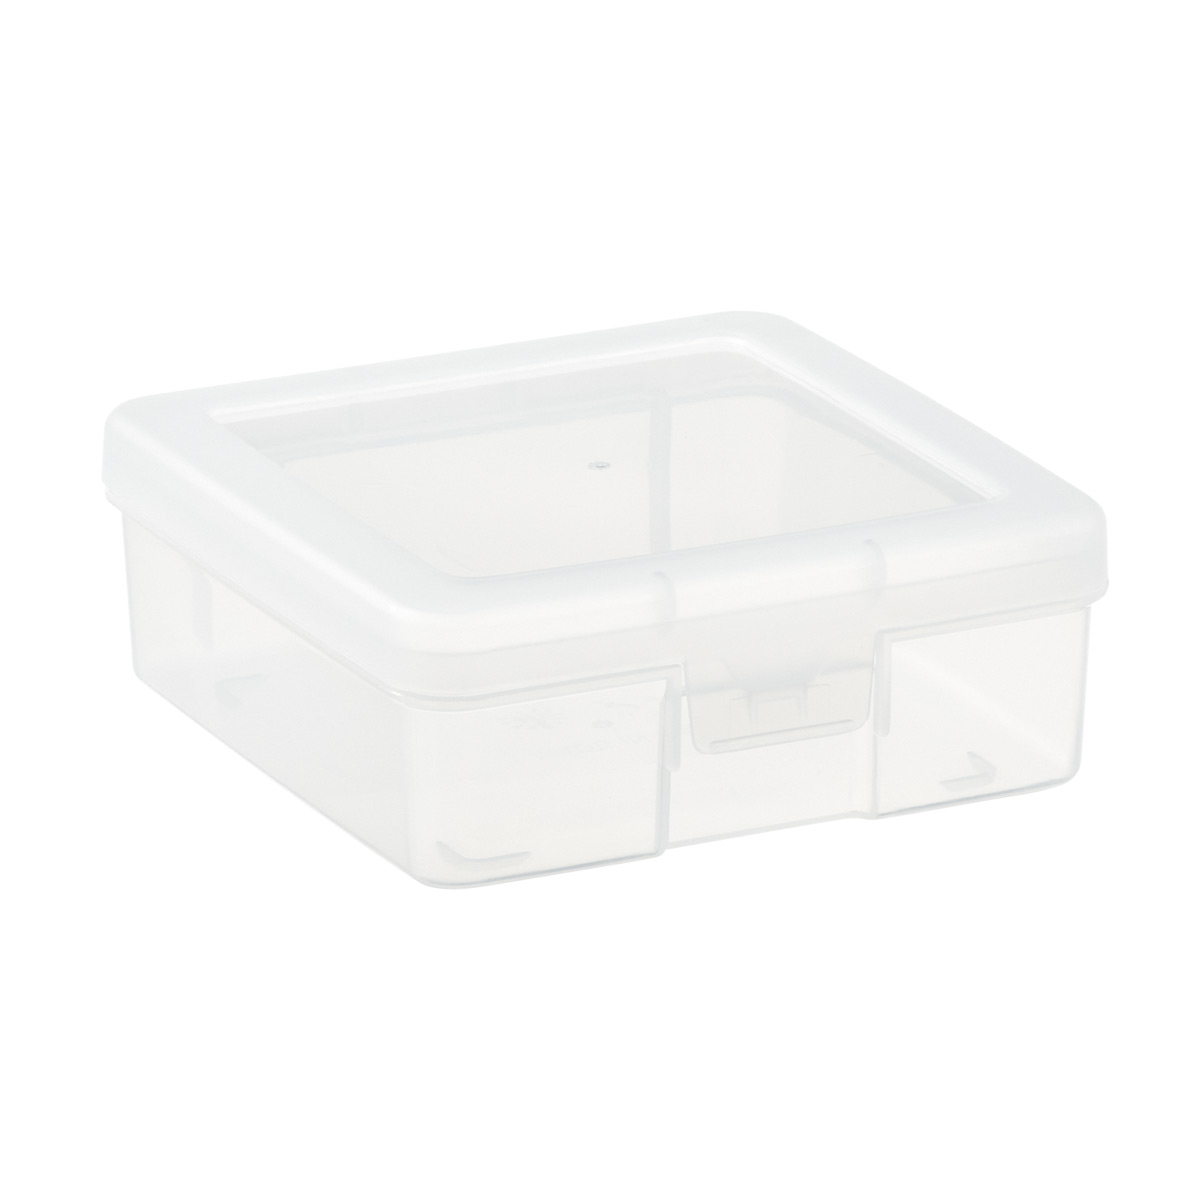 Hot Sale!Large Small Boxes Rectangle Clear Plastic Jewelry Storage Case  Container Packaging Box Desk Organizer School Stationery